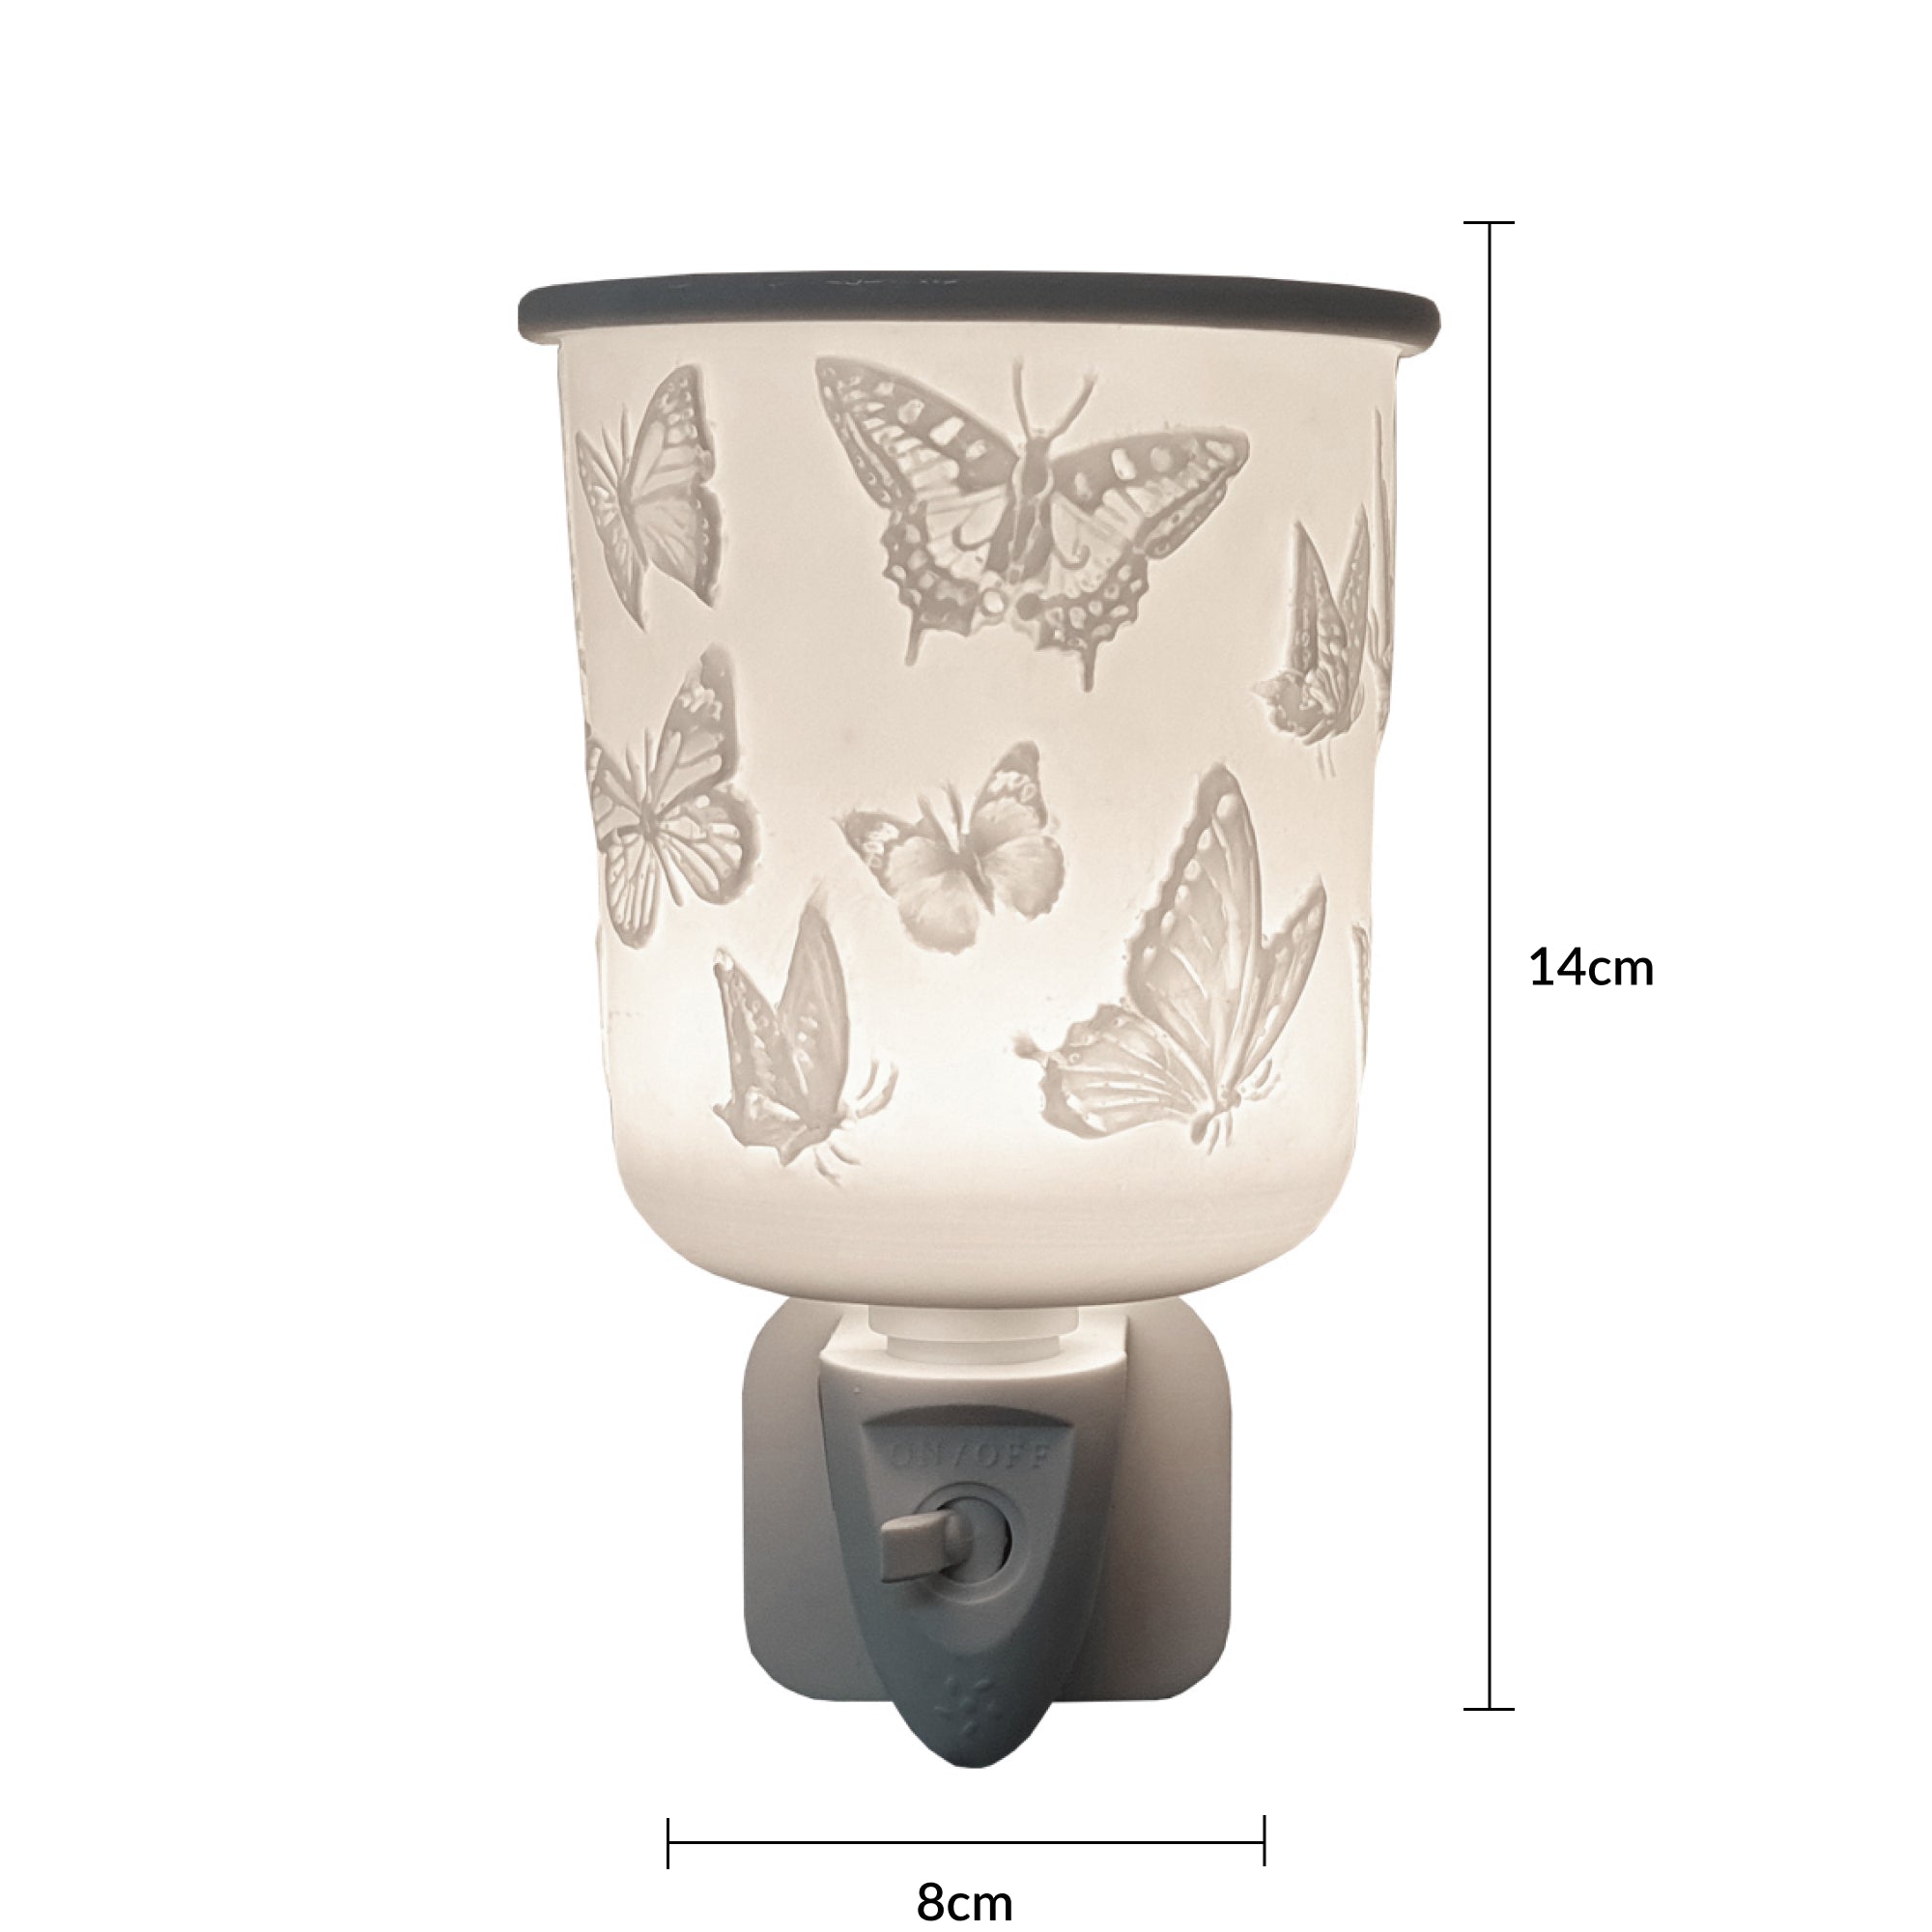 Cello - Porcelain Plug In Electric Warmer - Butterfly